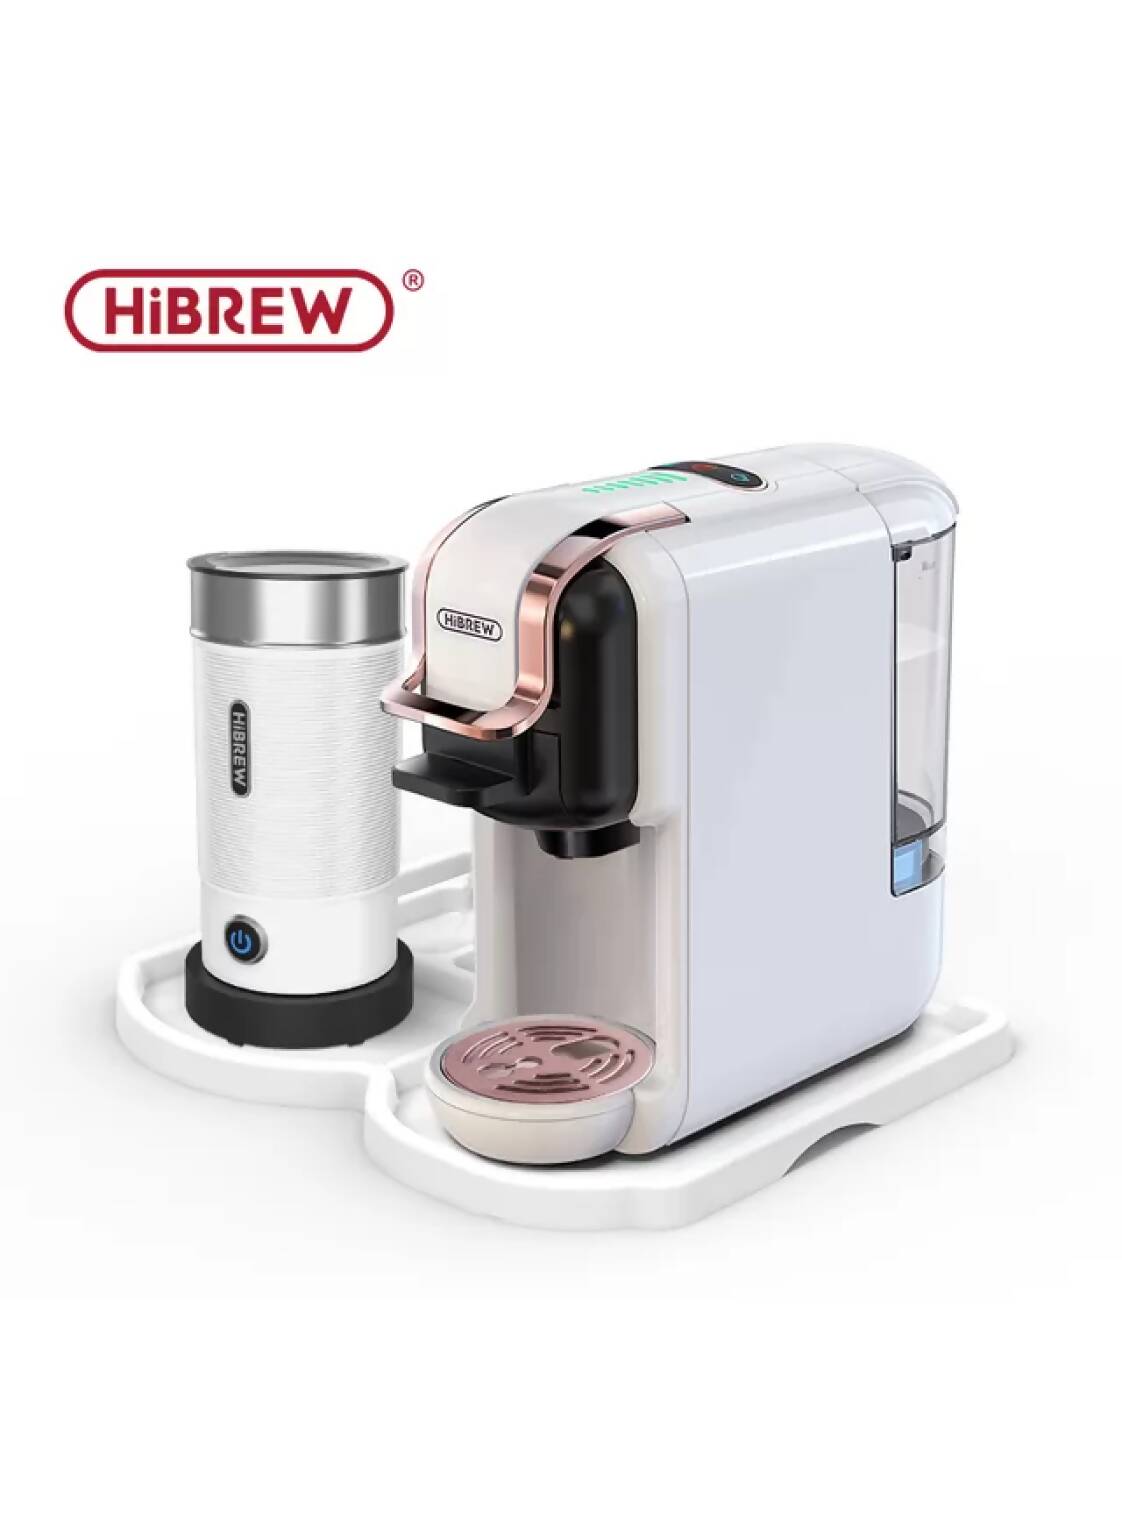 HiBREW H2B 5in1 + M1A Milk Frother Offer